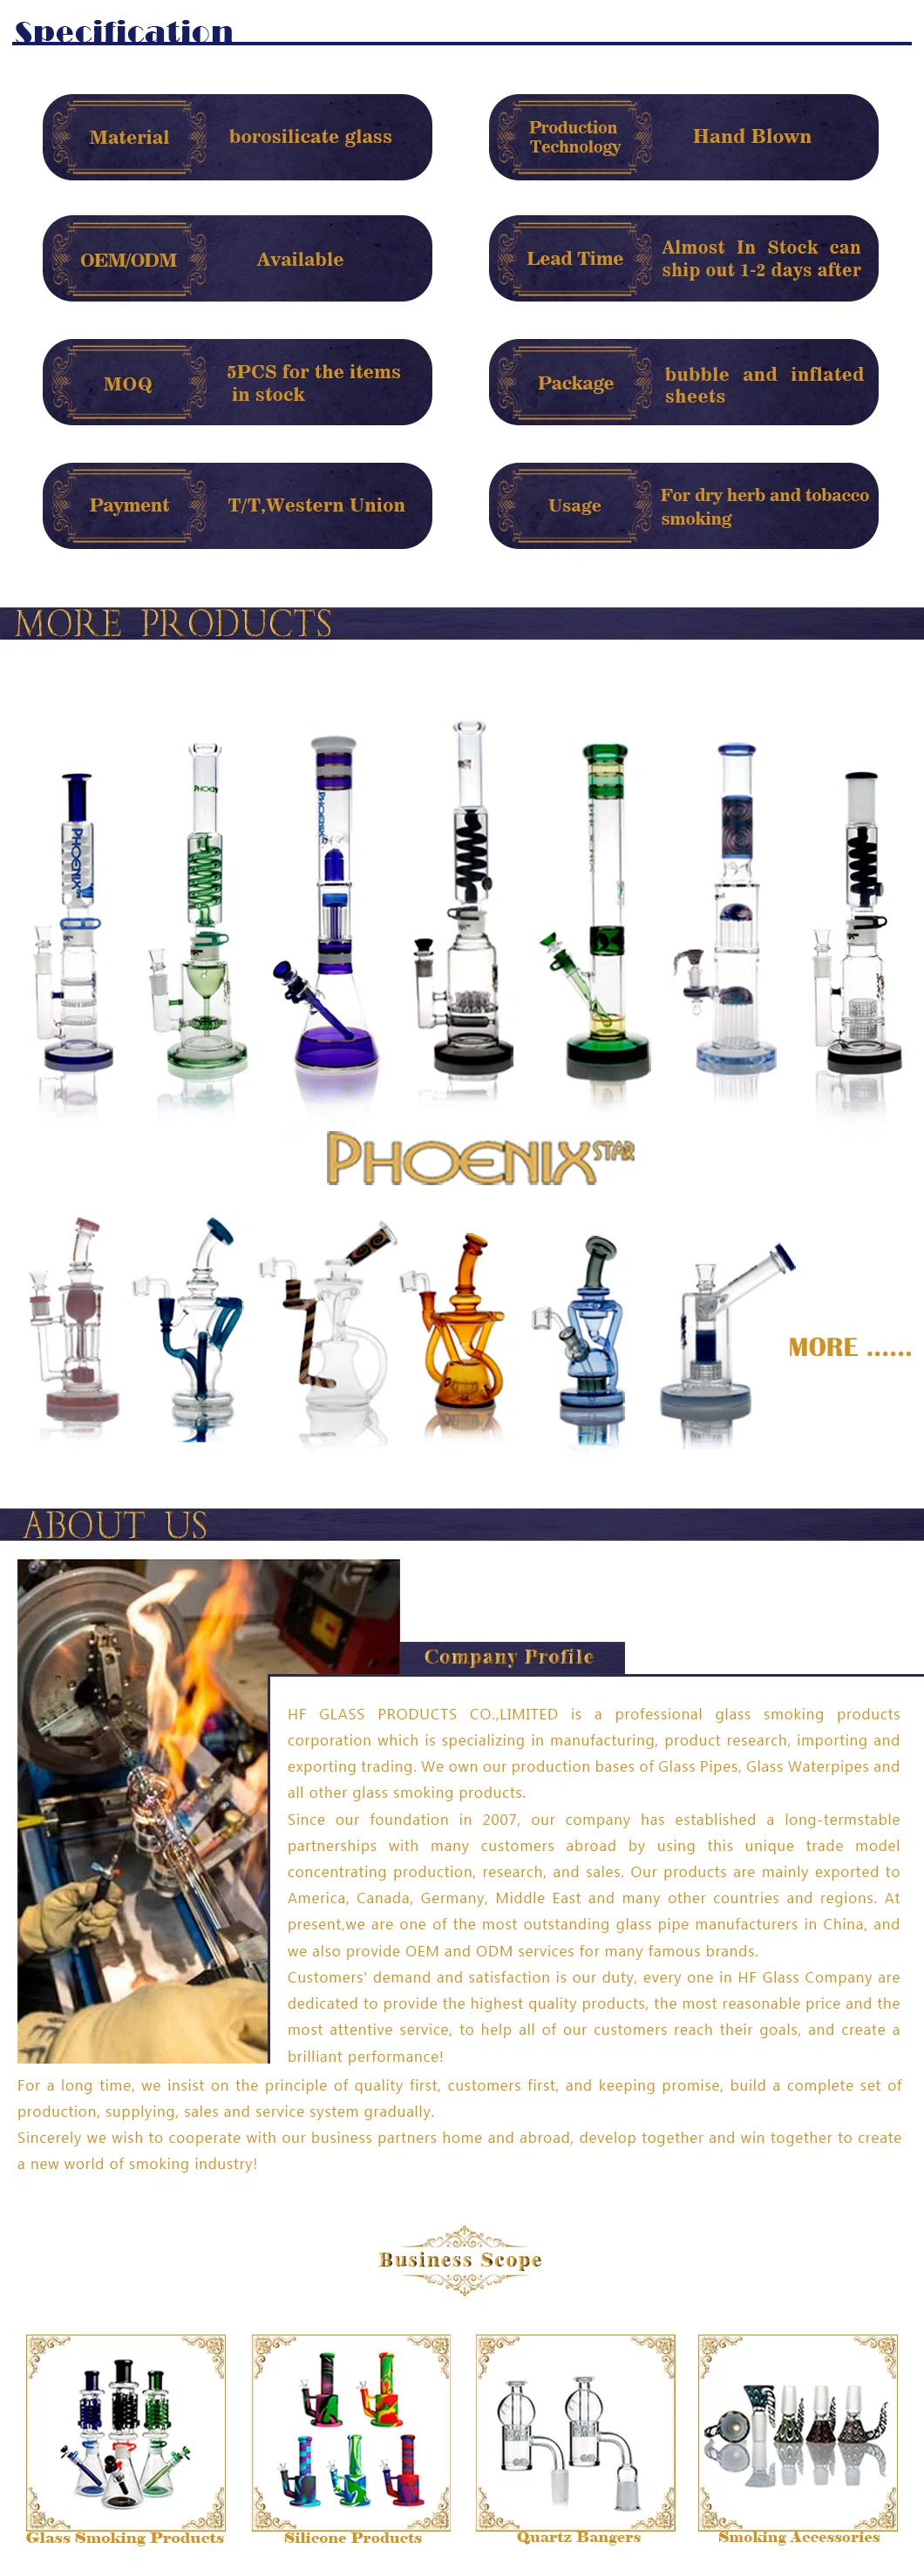 Phoenix Star Hot Sale 8.8 Inches Oil Recycler Color Ring Base Qurtz Banger Honeycomb Perc Heady Hookah China Manufacturer Pyrex Glass Smoking Water Pipe